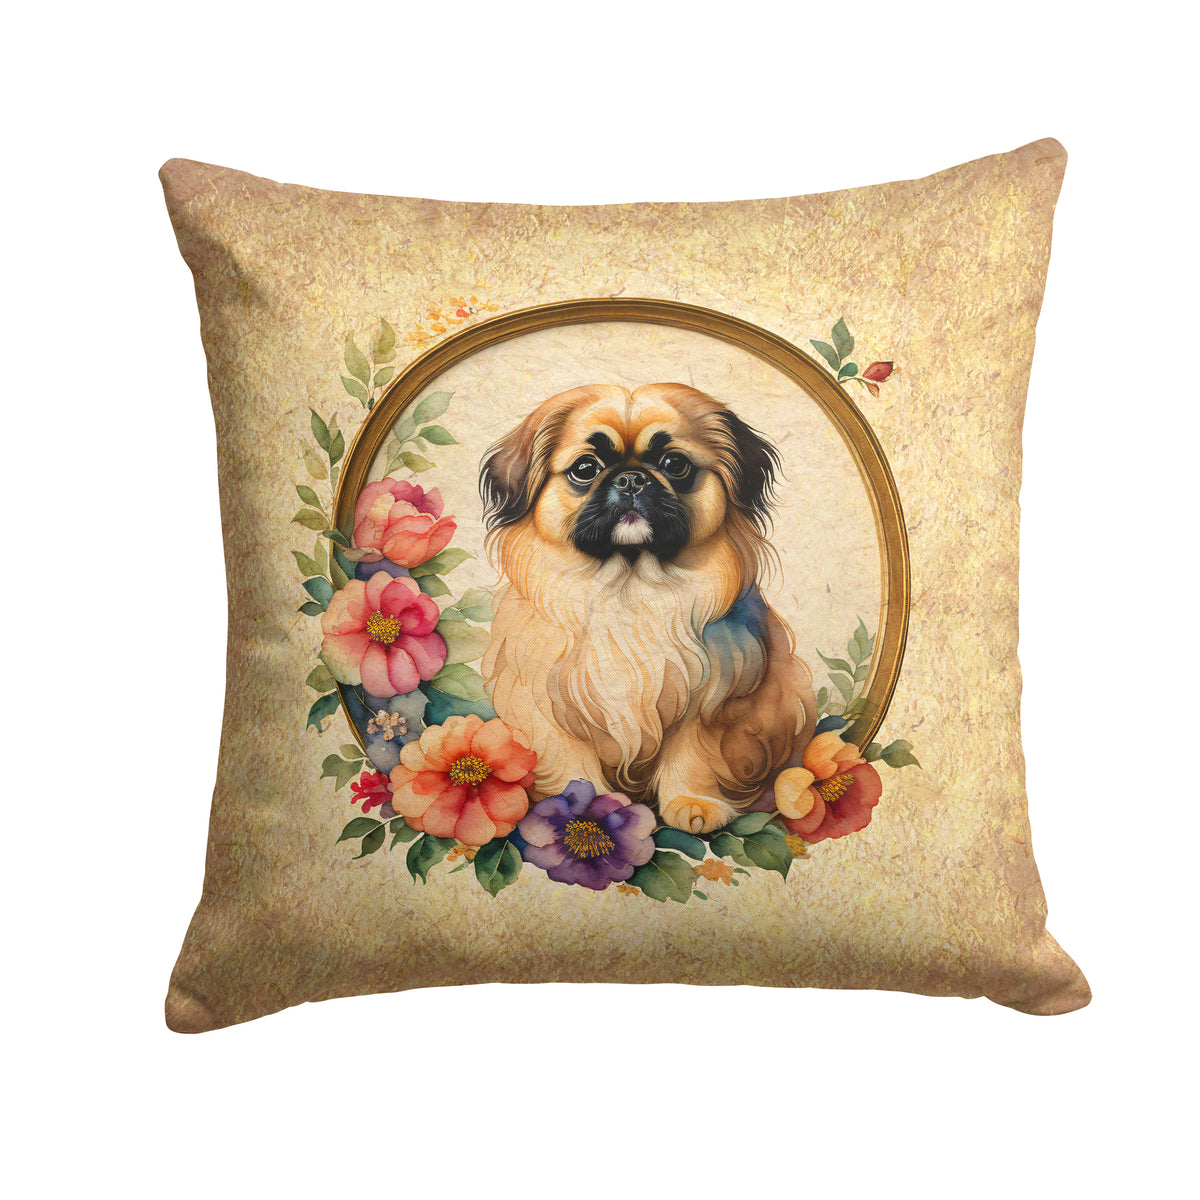 Buy this Pekingese and Flowers Fabric Decorative Pillow